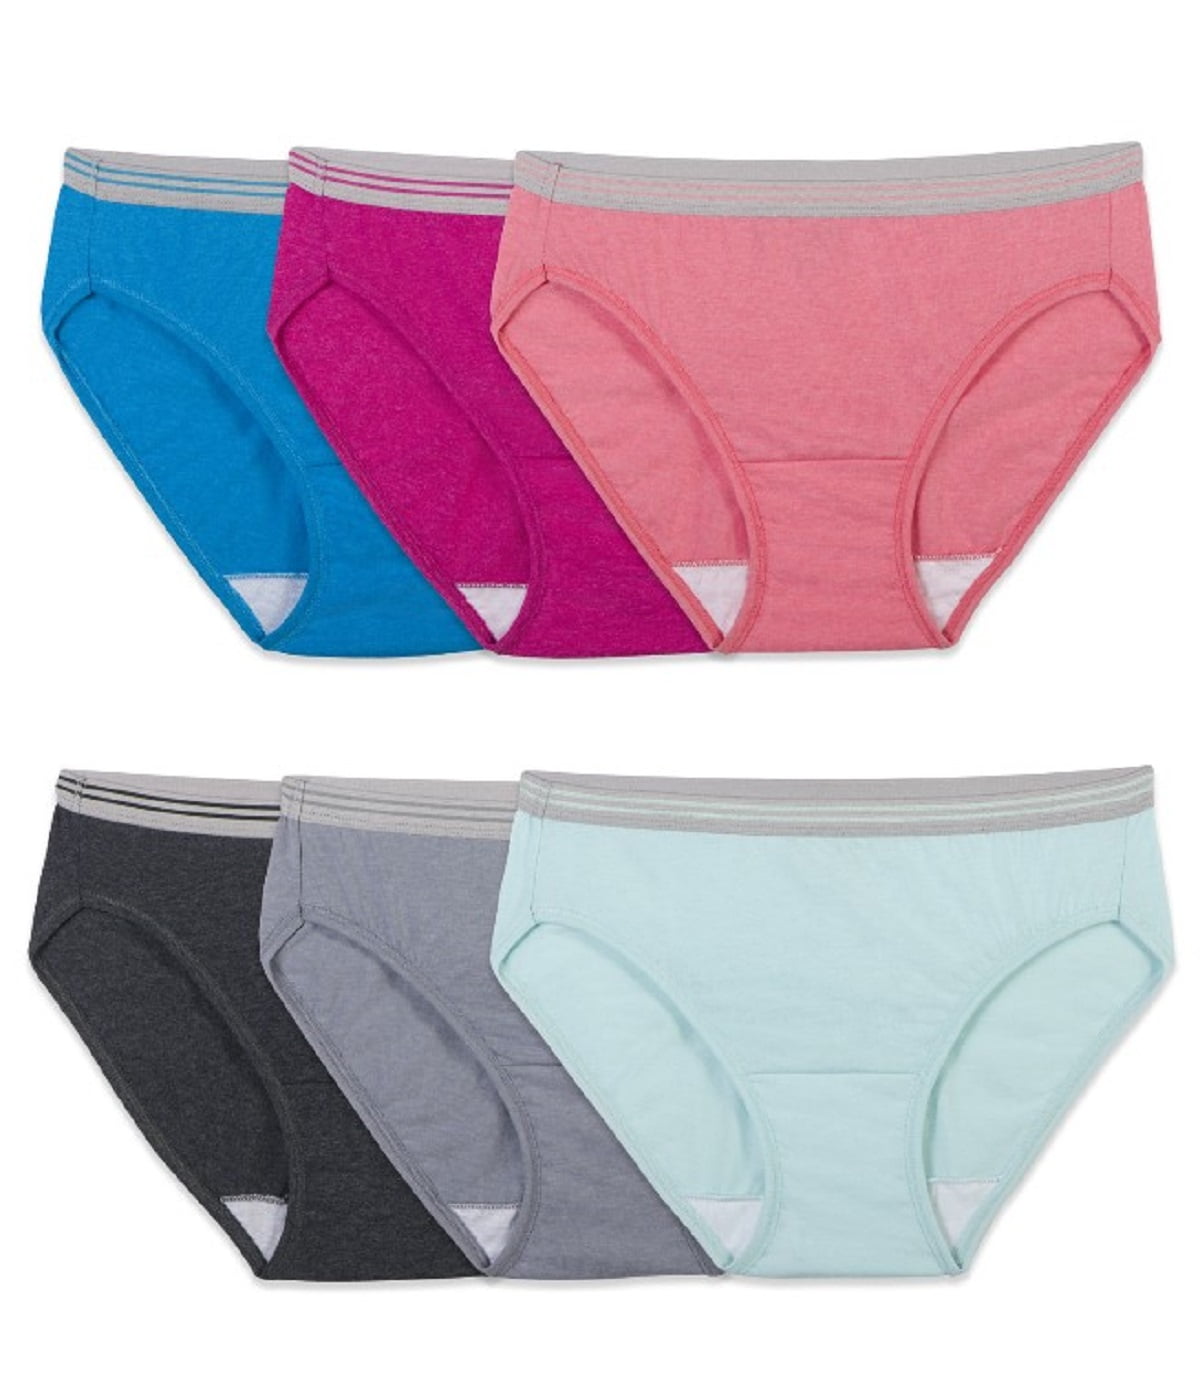 6 Pack of Fruit of the Loom Women’s Underwear Cotton Bikini Panty  Multipack, Assorted, 7